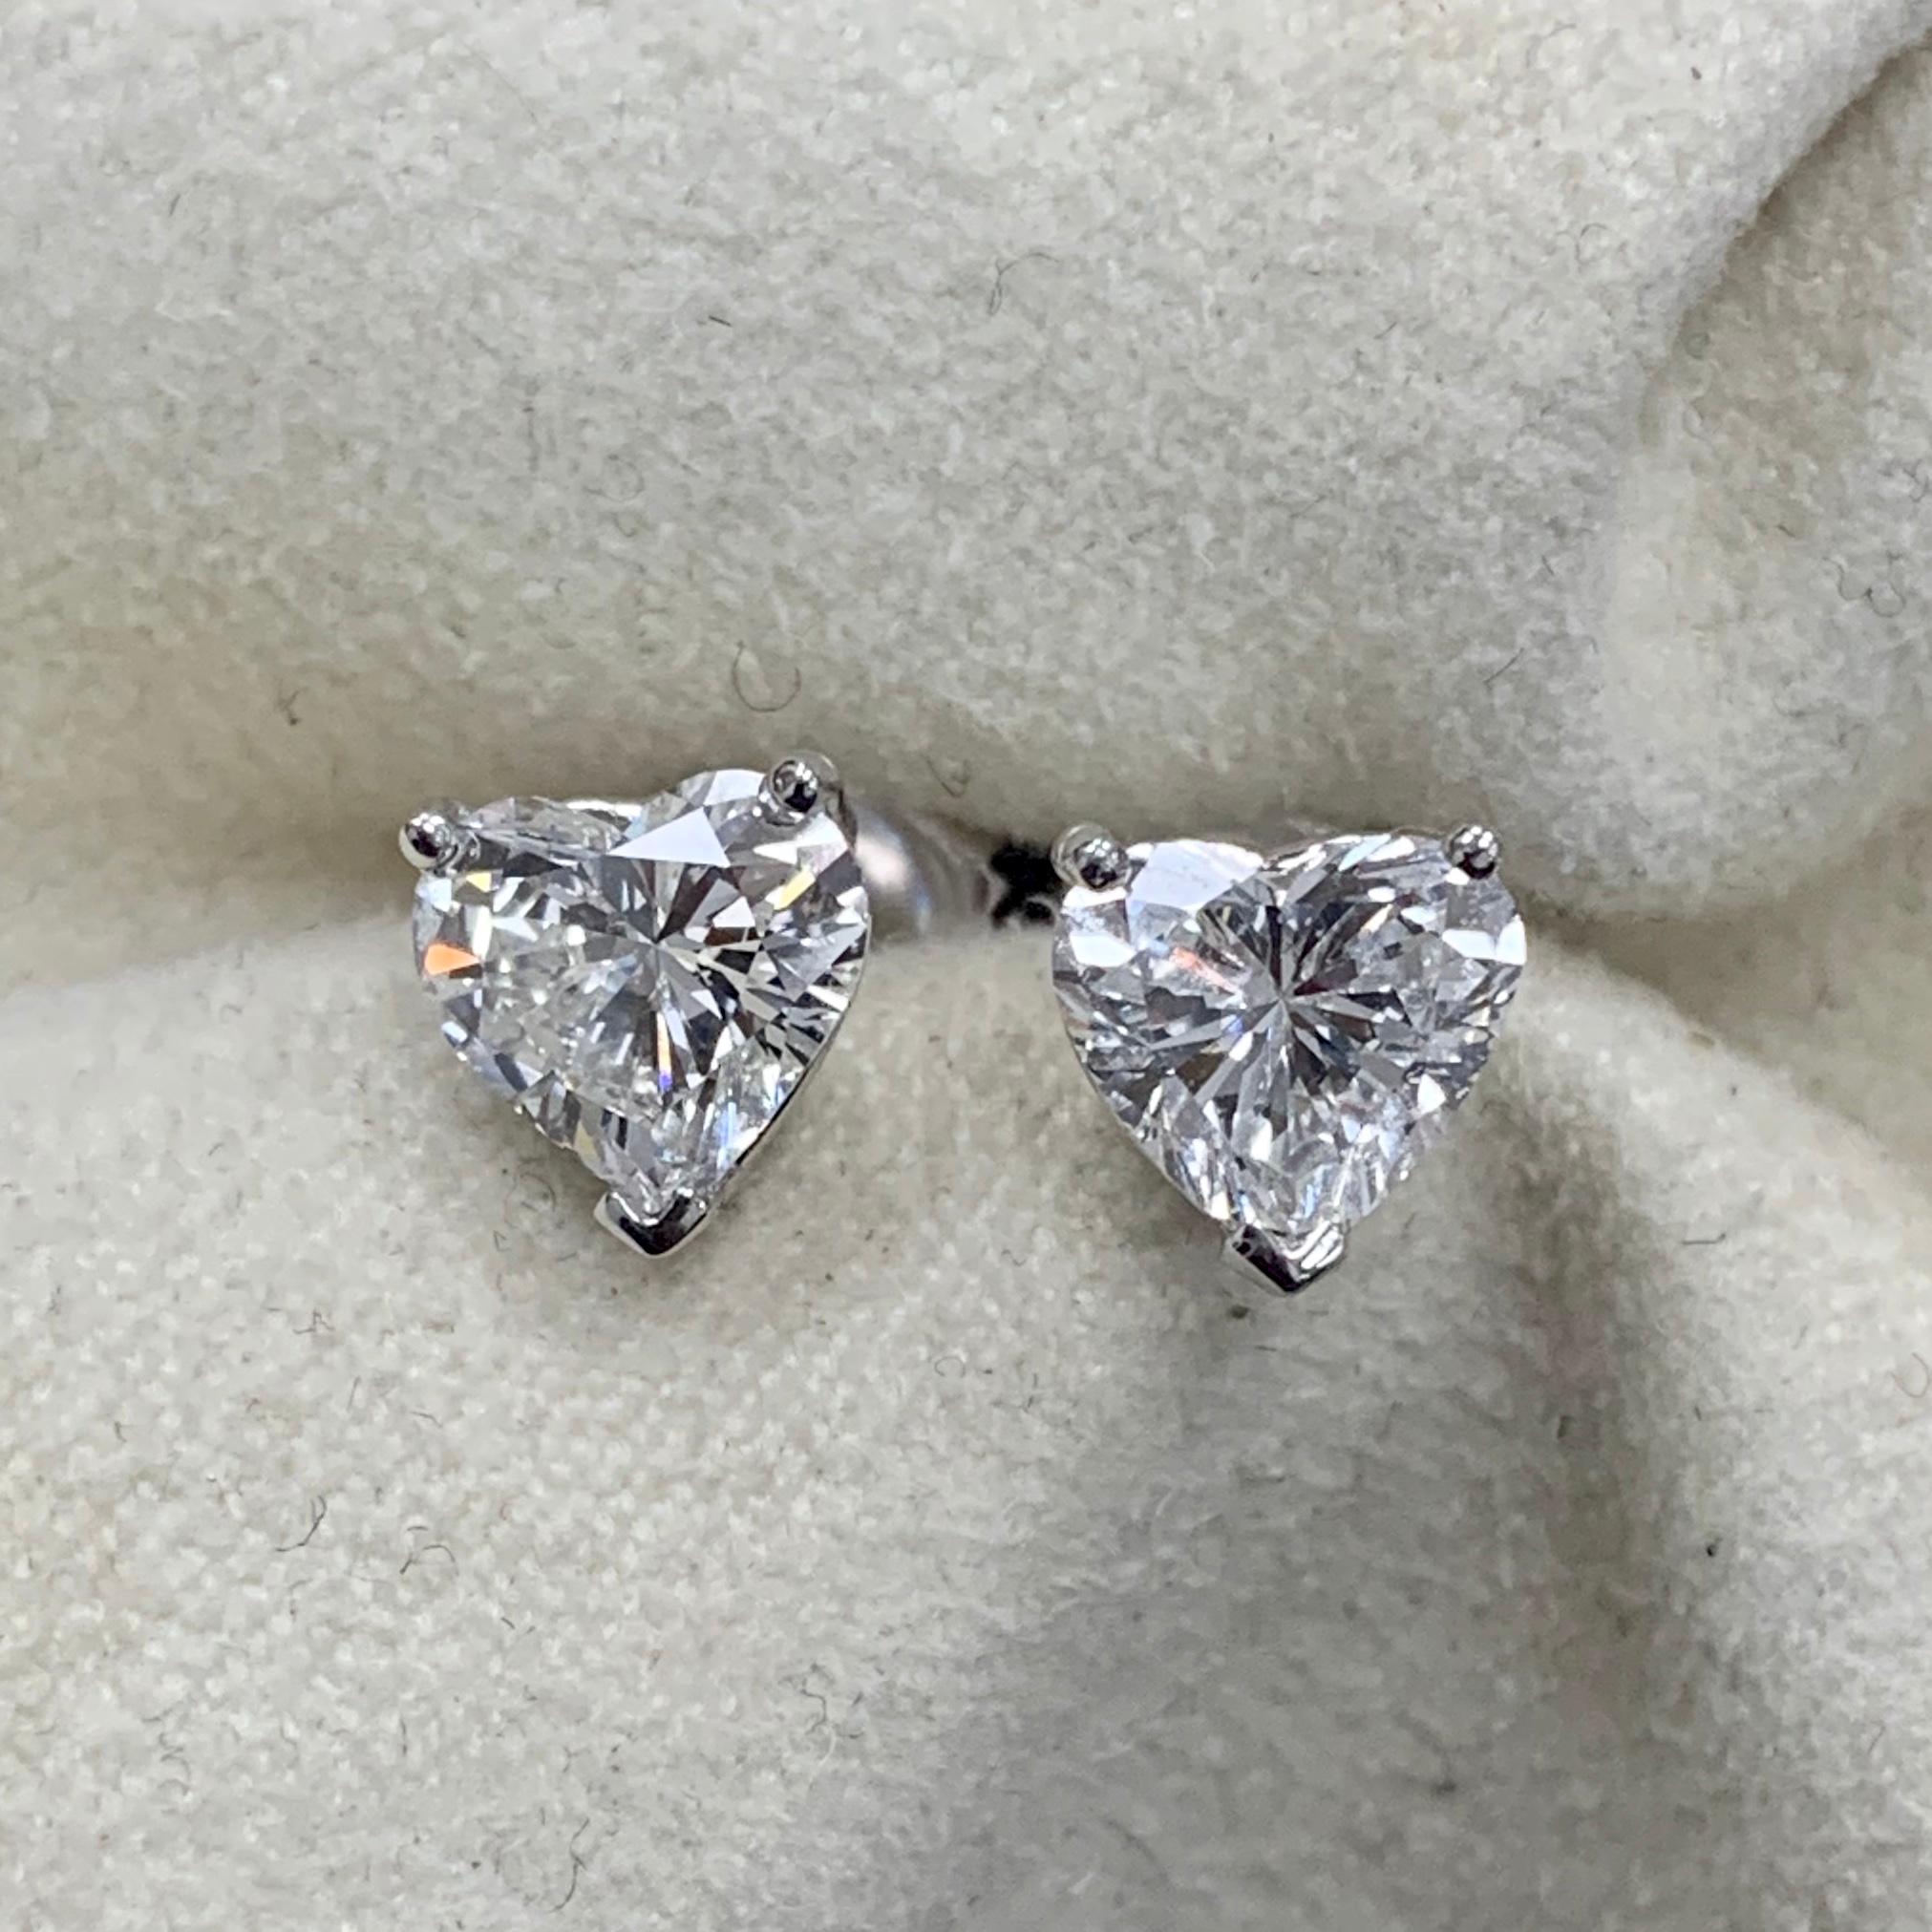 Diamond solitaire studs are a signature everyday piece of jewelry. They are a classic and a statement simultaneously. 

This particular pair of Heart Shape Studs features a depth of 53.1% and 55.7% enabling it to look more like a pair of 1.5 ct each